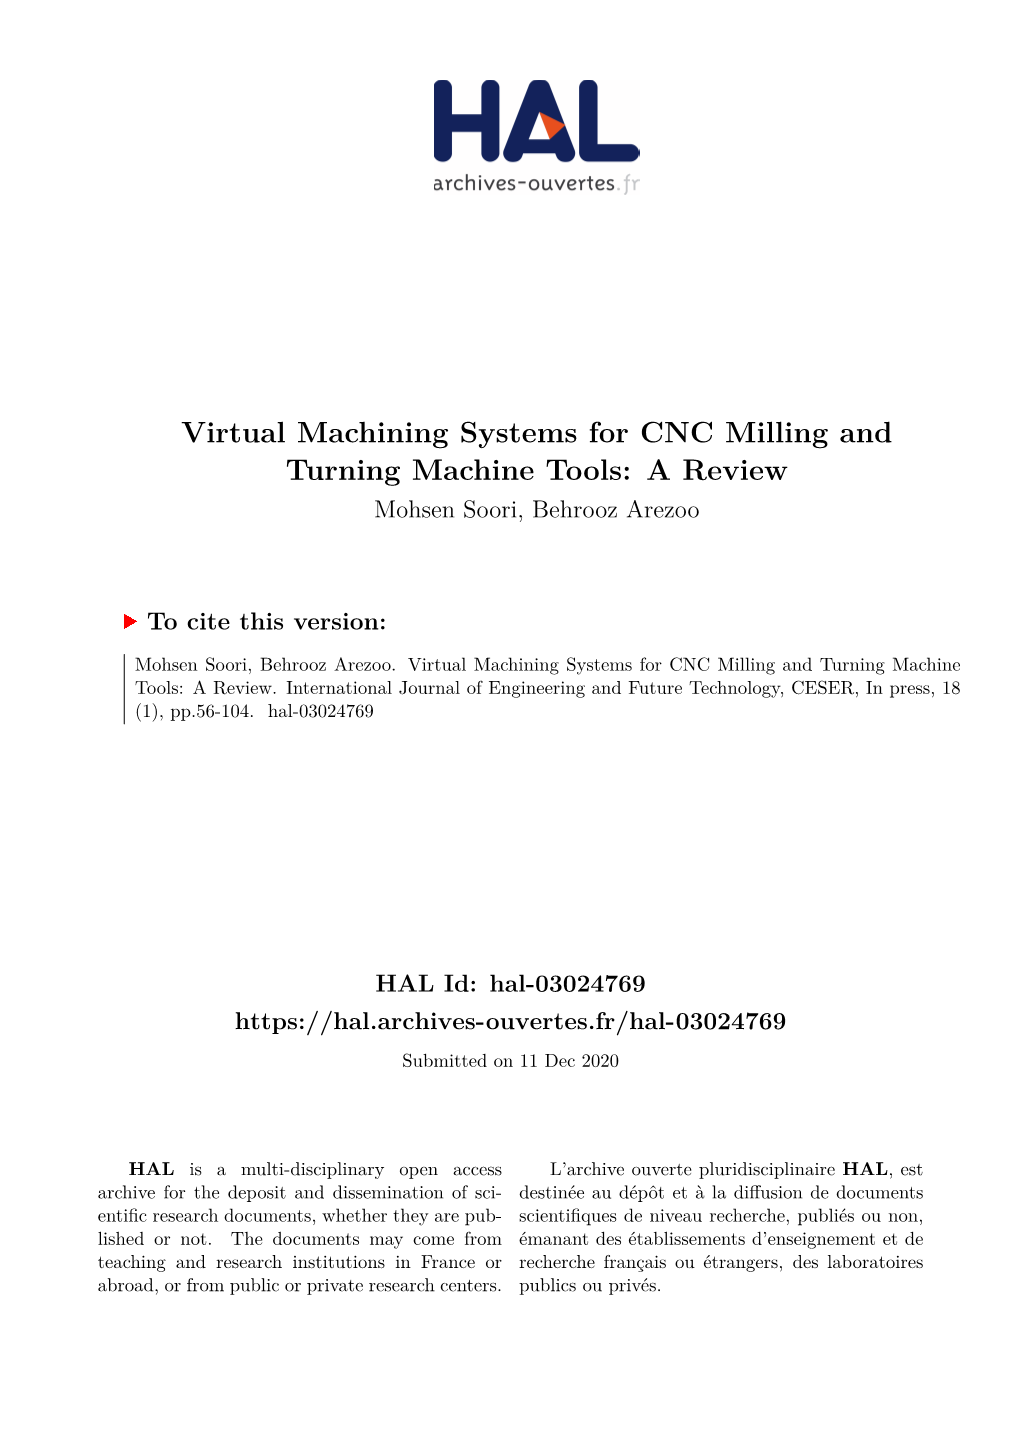 Virtual Machining Systems for CNC Milling and Turning Machine Tools: a Review Mohsen Soori, Behrooz Arezoo